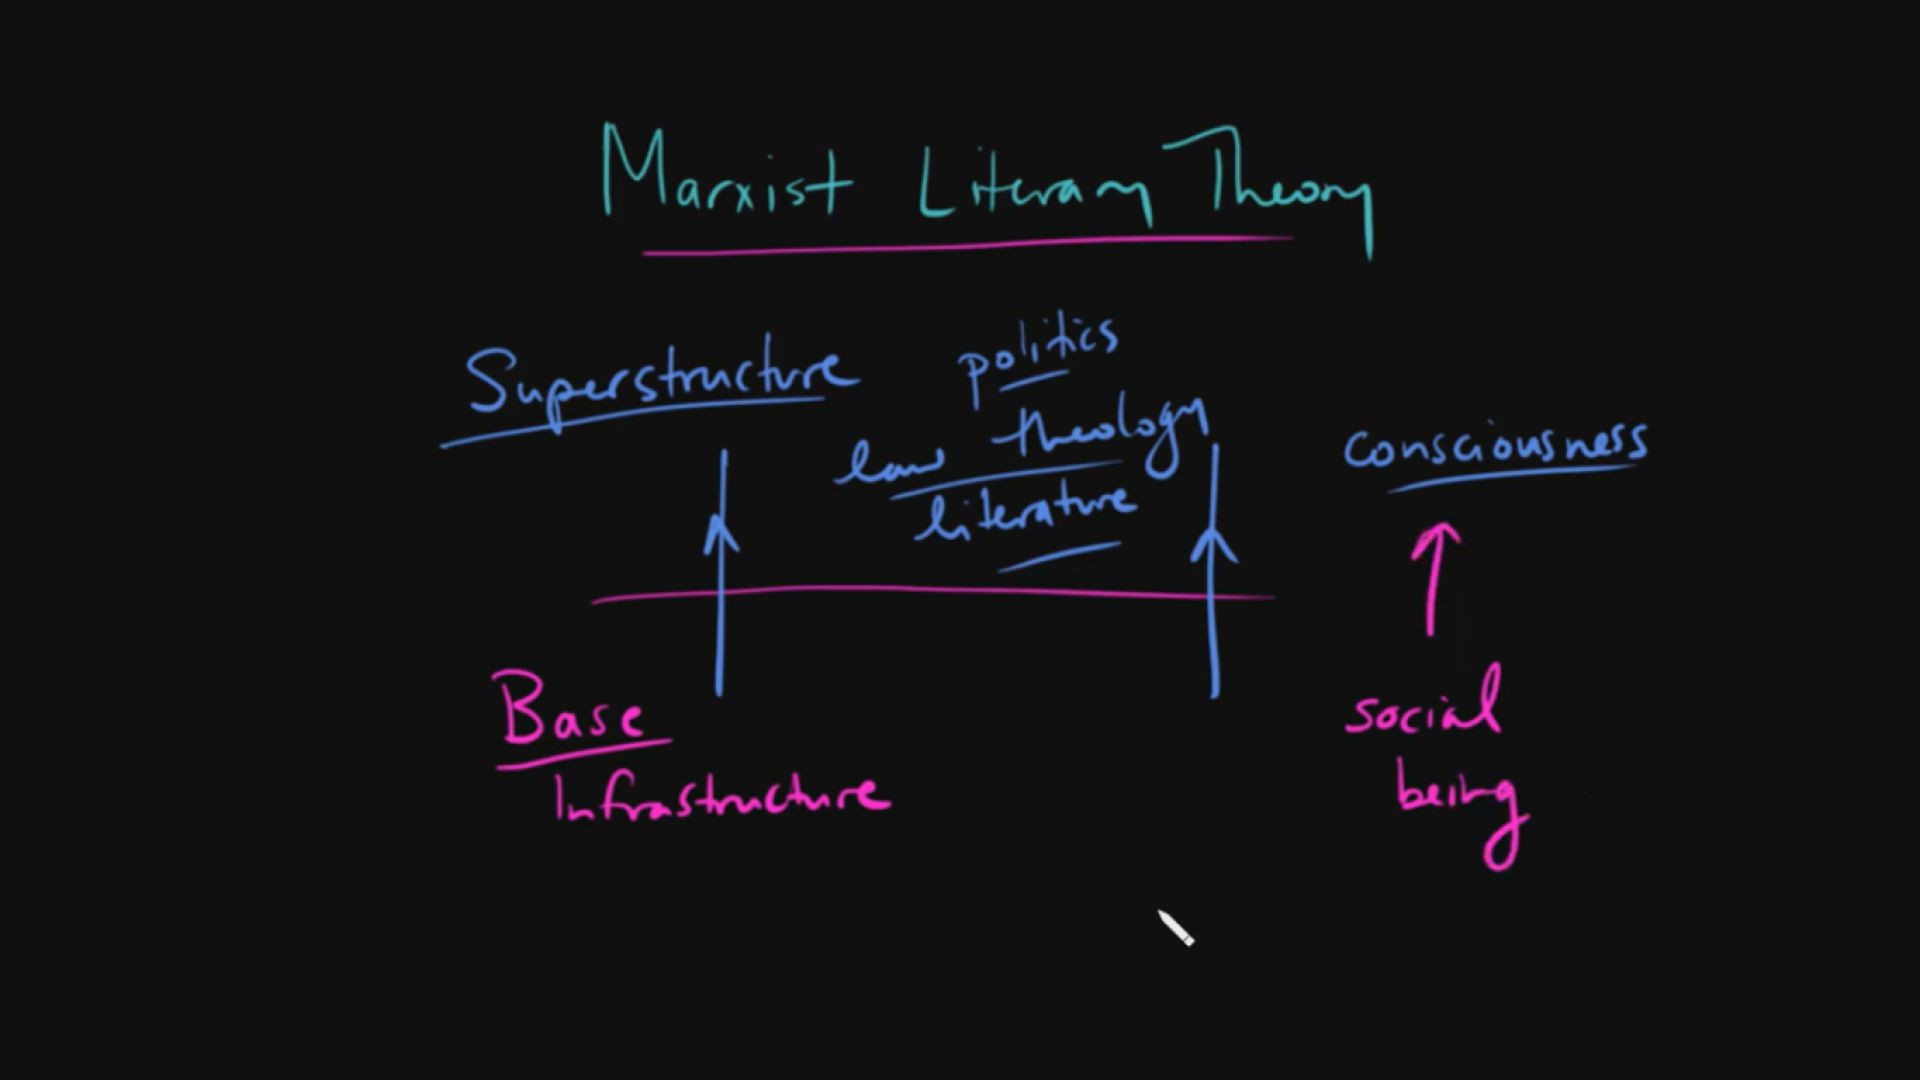 Introduction to Marxist Literary Theory